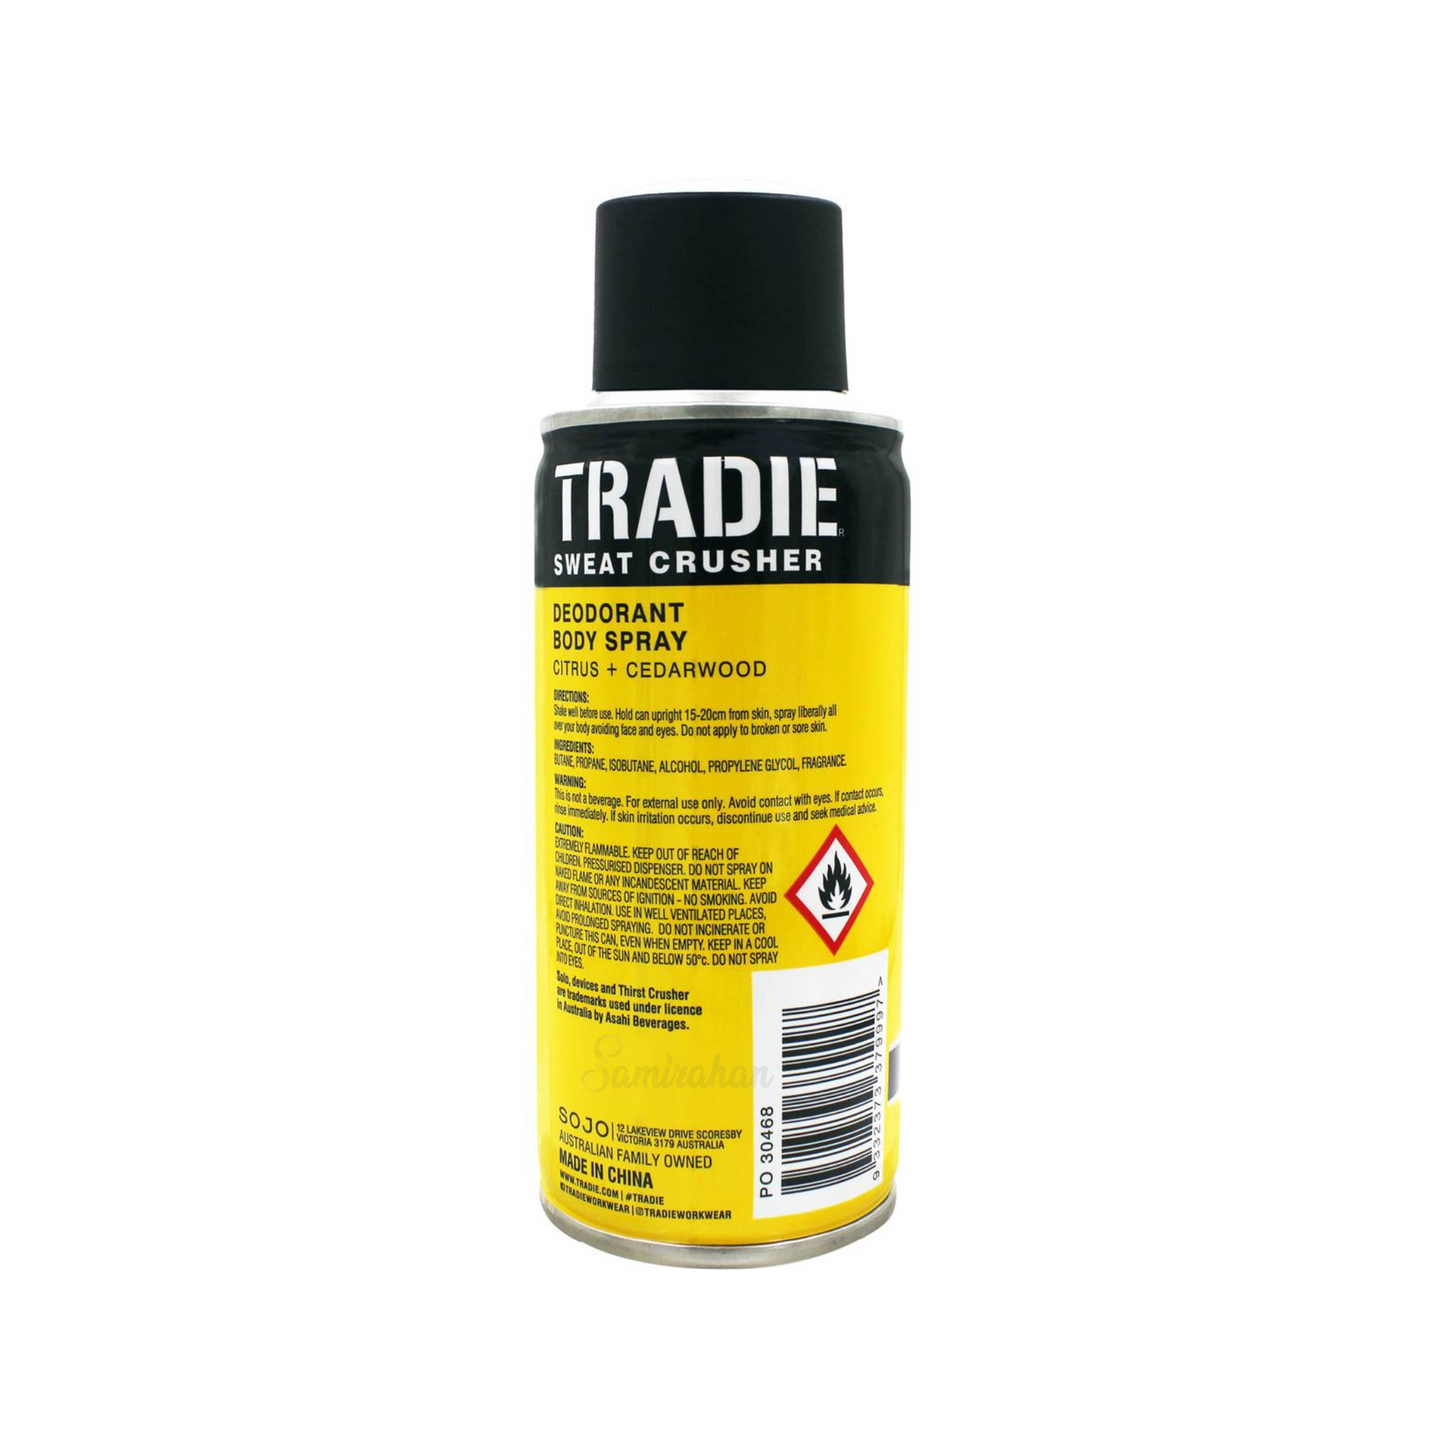 Tradie Solo Deodorant Body Spray comes with the iconic fragrance of the famous Aussie drink Solo, with a Citrus & Cedarwood smell. Best imported foreign Australian Aussie anti-perspirant deo premium genuine authentic original real scent perfume men gift idea ideas cheap price in Dhaka Chittagong Sylhet Bangladesh.